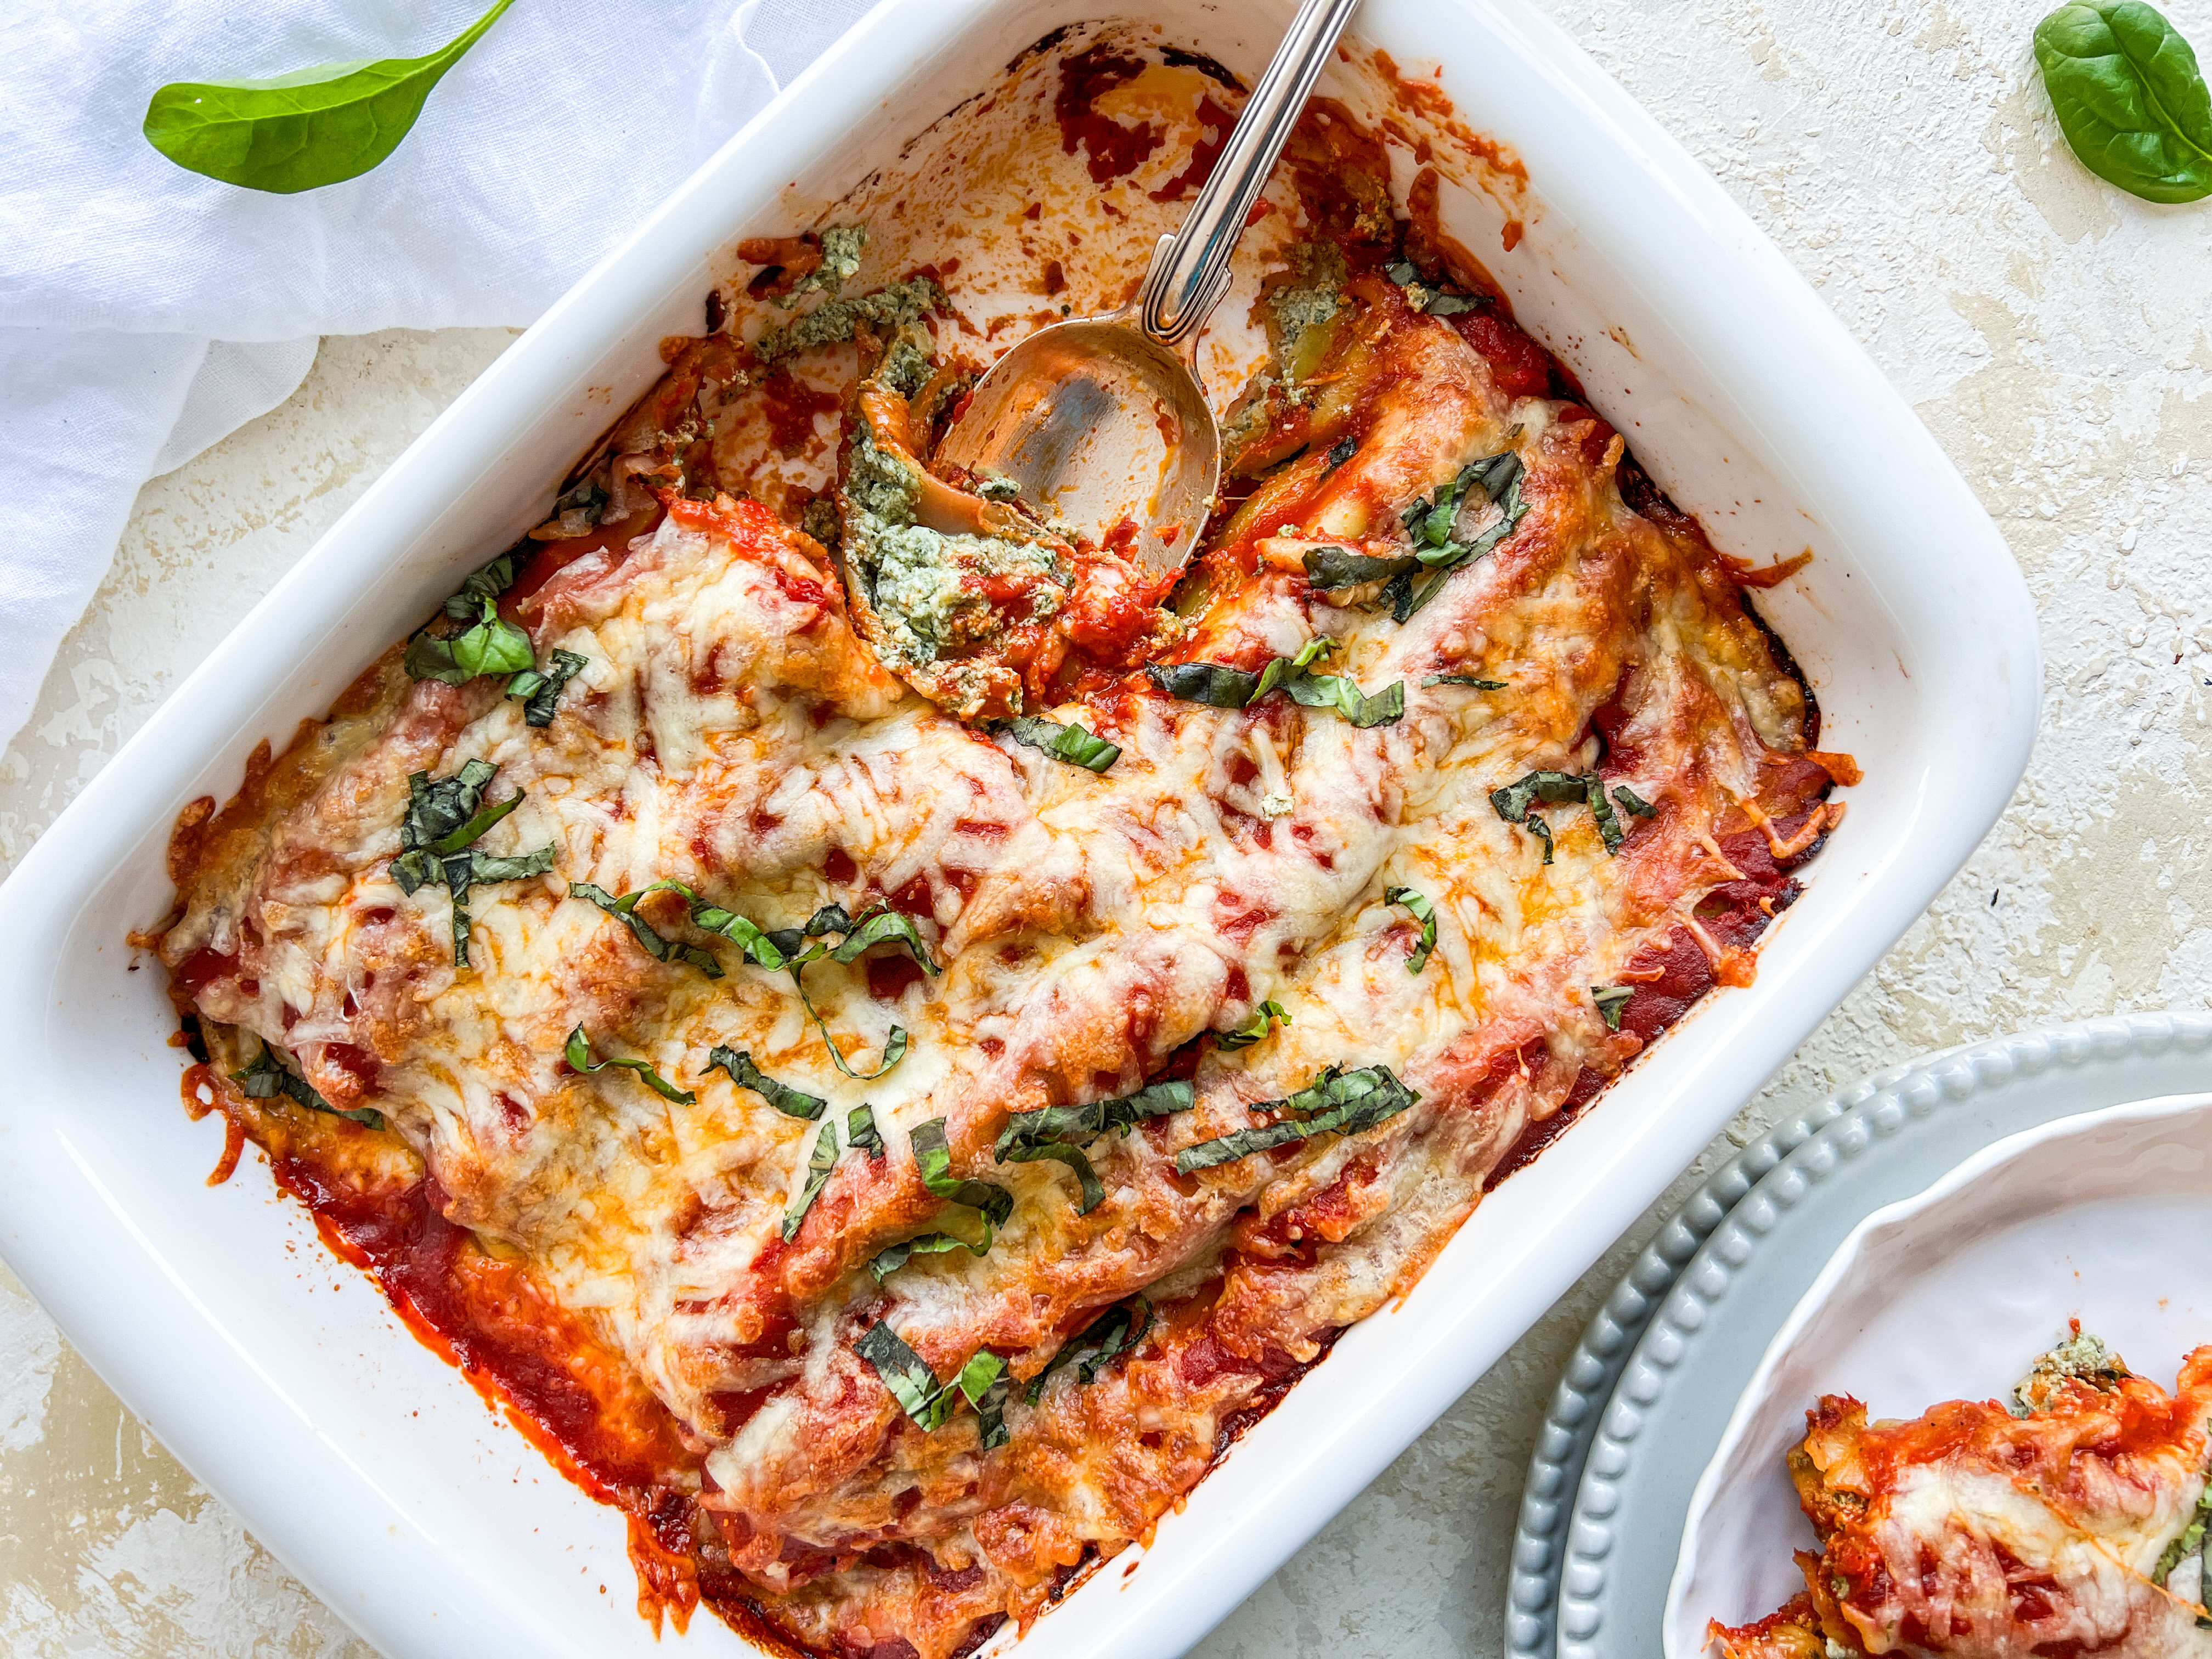 Photograph of Spinach and Ricotta Canneloni